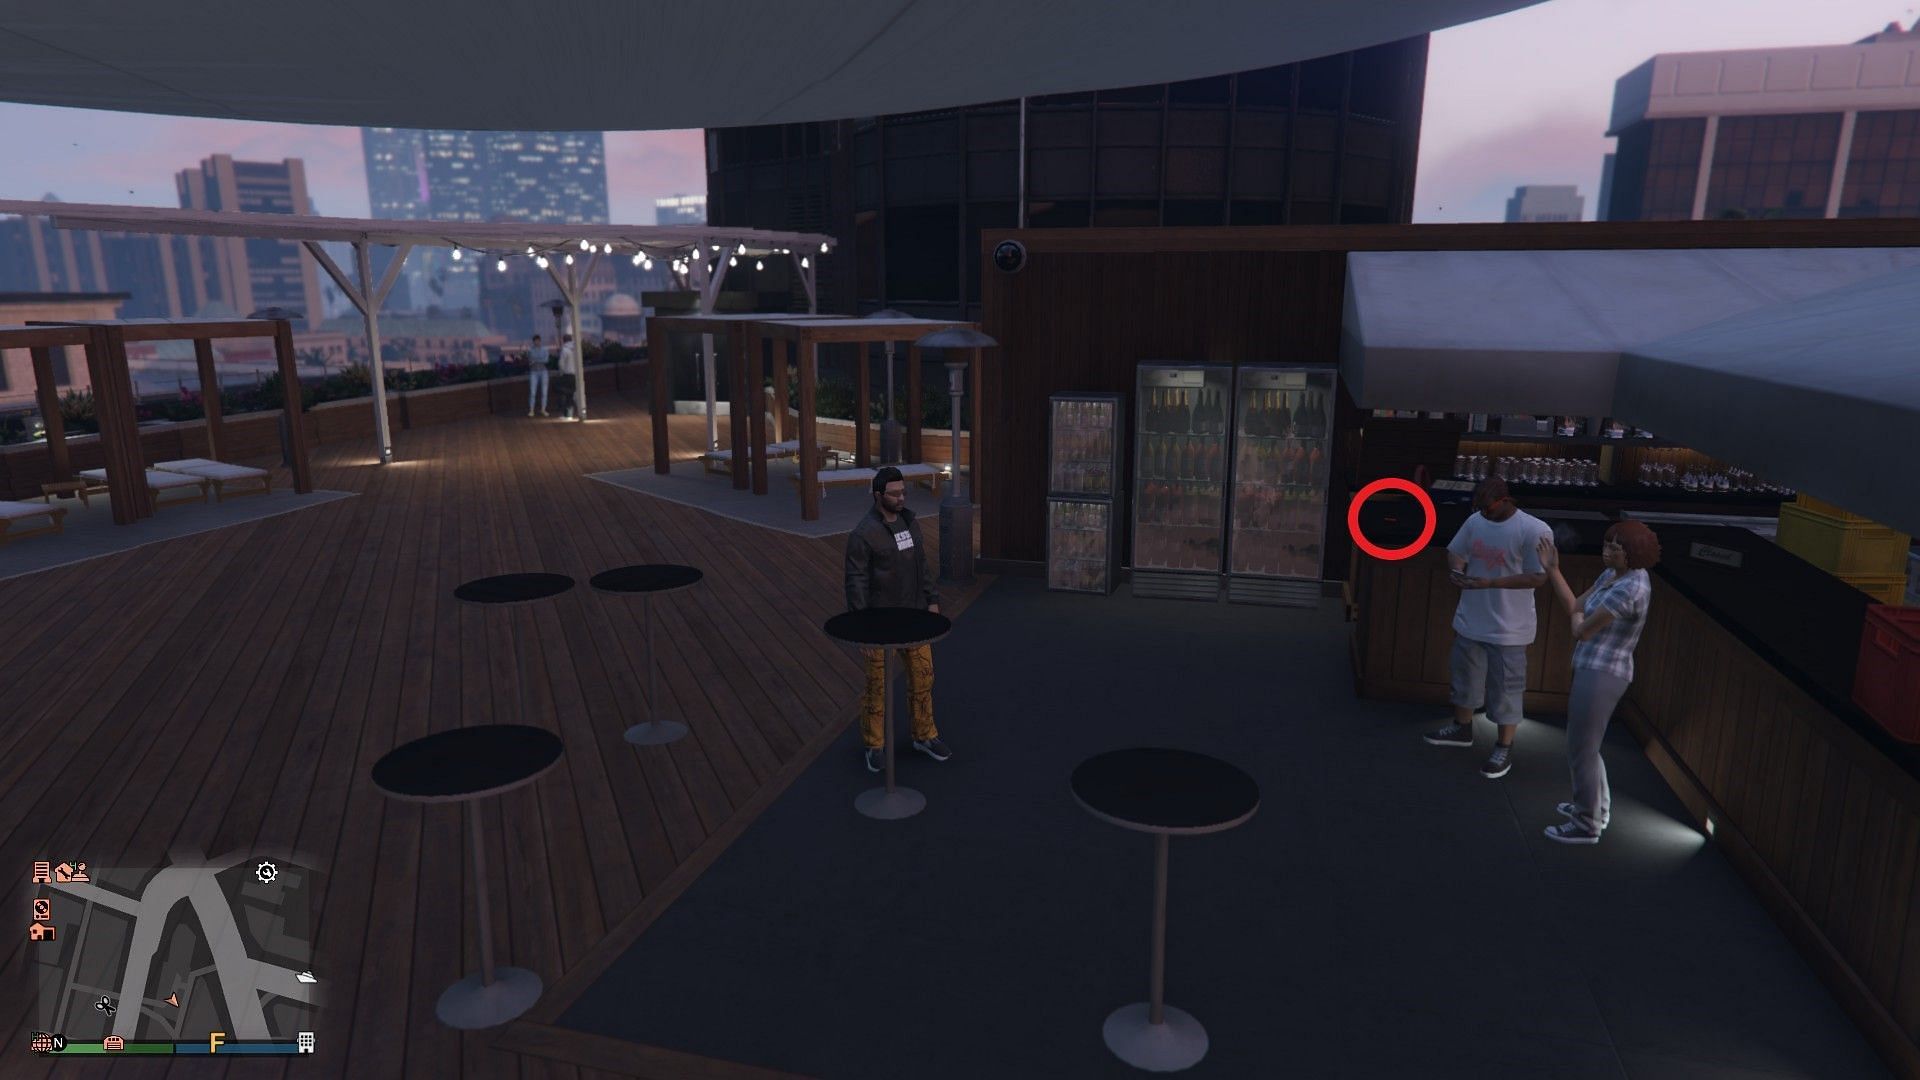 This location is the rooftop bar at Record A Studios (Image via GTAWeb.eu)